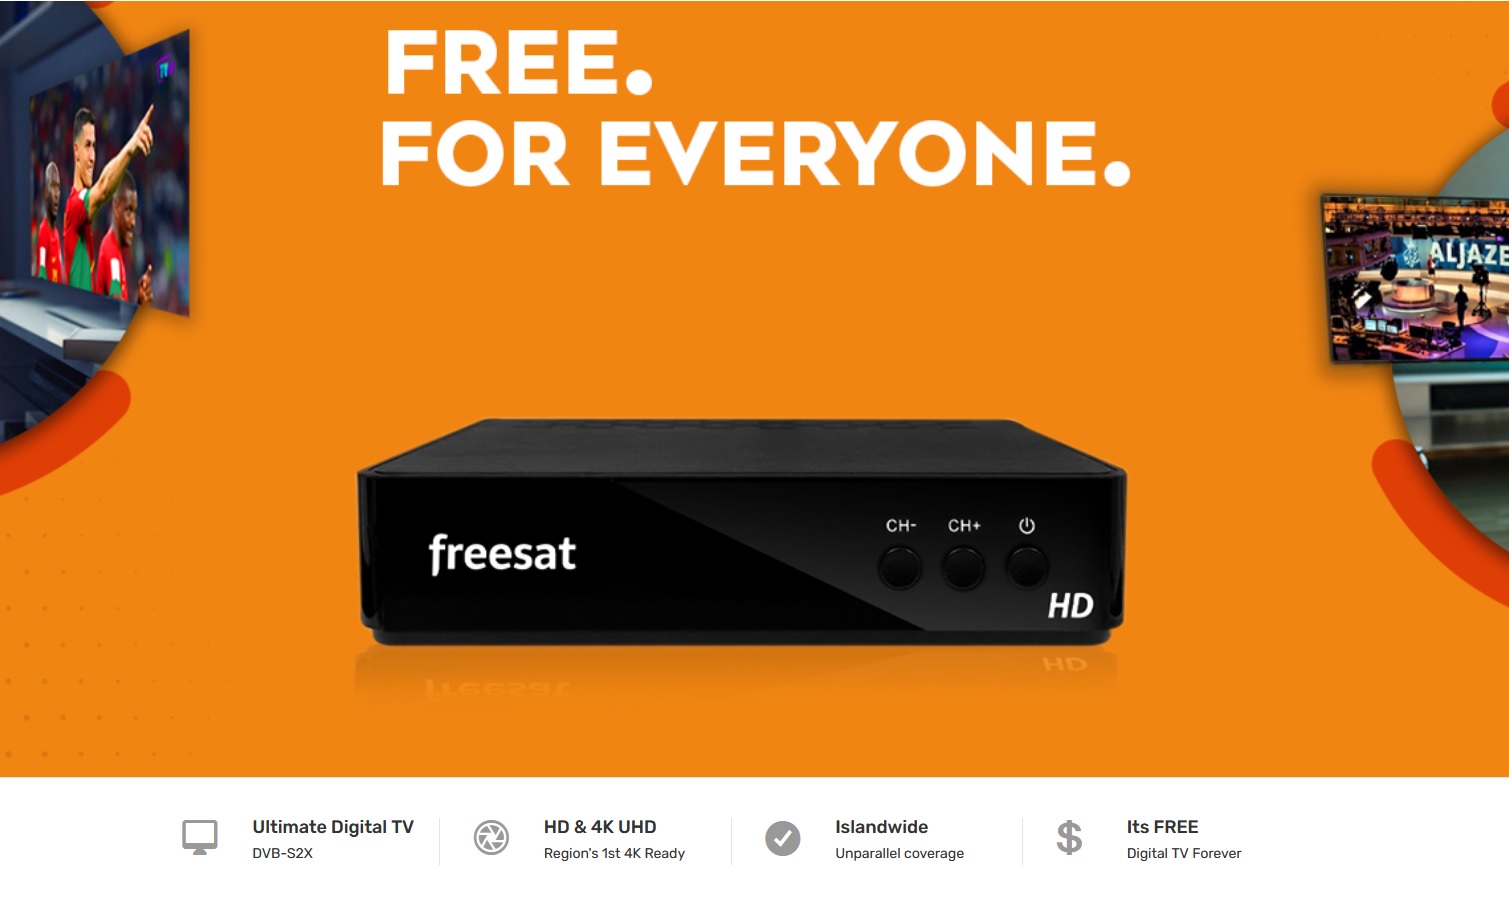 What’s on Freesat